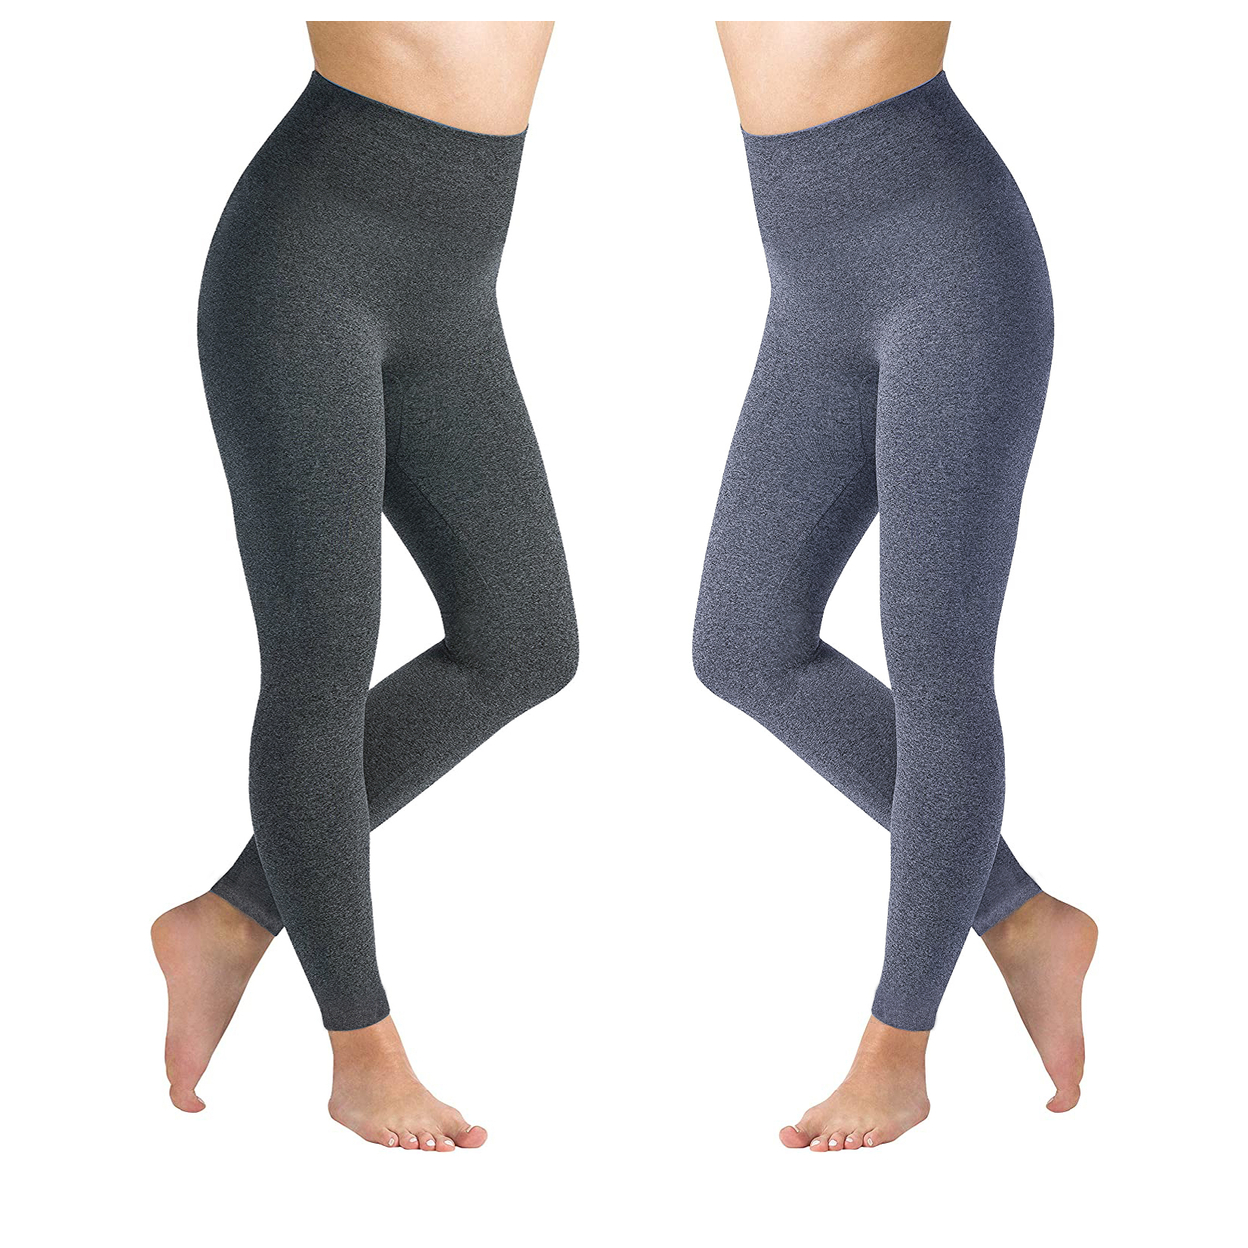 2-Pack: Women's High Waisted Ultra Soft Fleece Lined Warm Marled Leggings(Available In Plus Sizes) - Charcoal & Navy, 1x